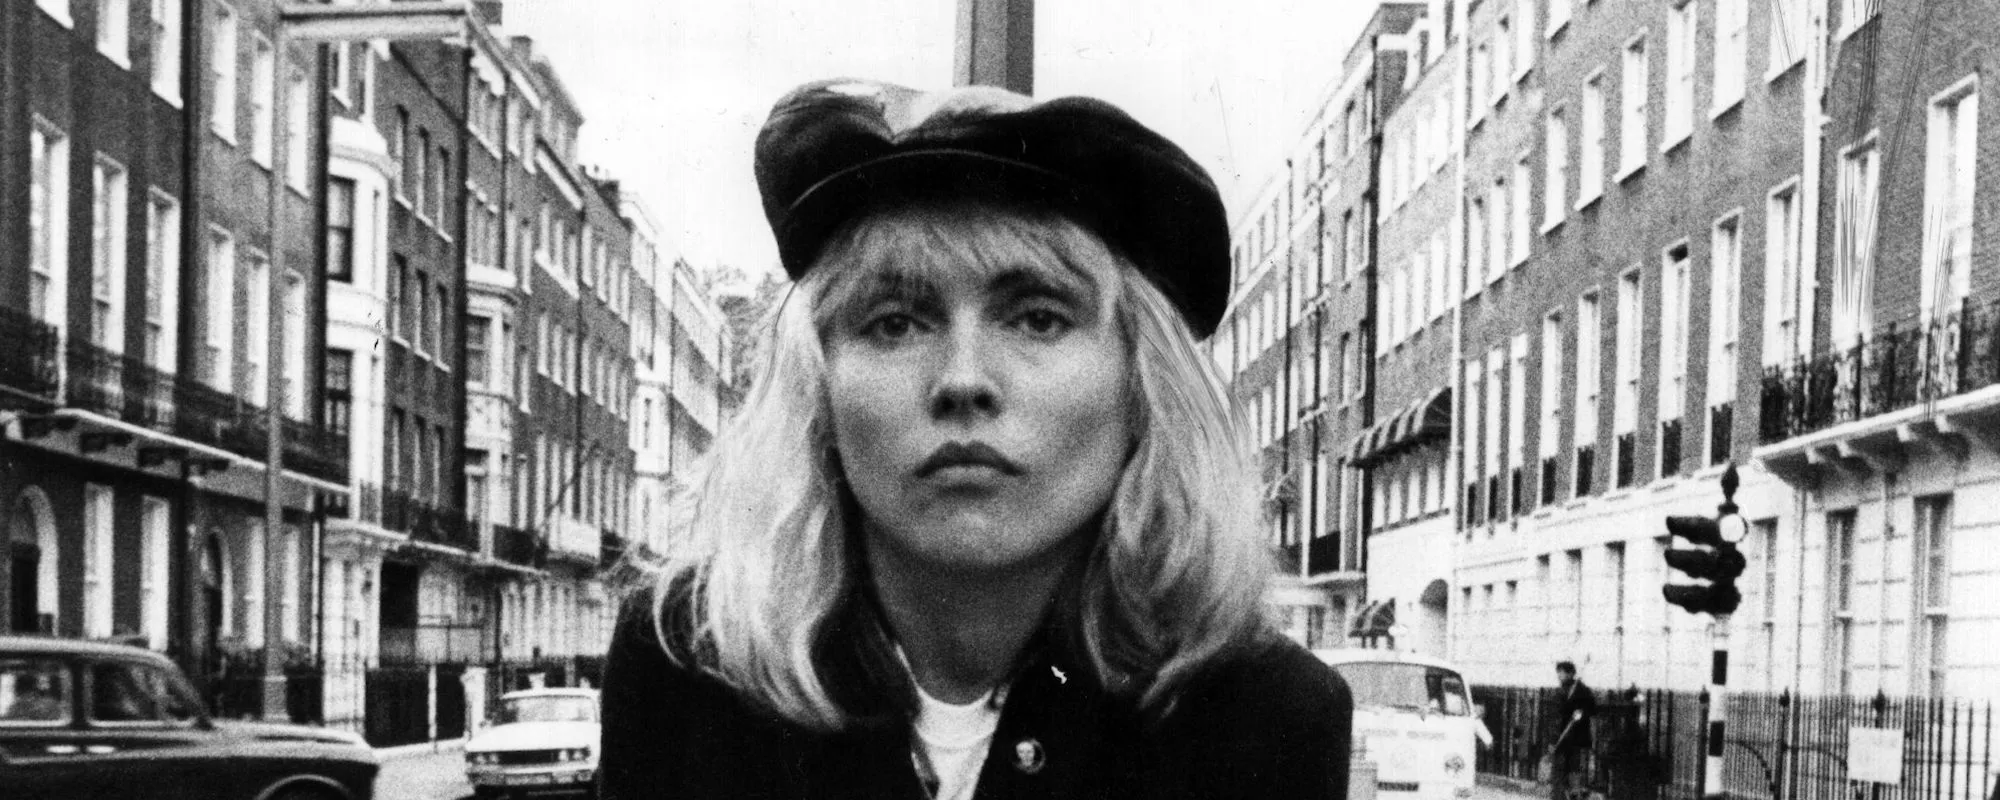 On This Day: Blondie Hit No. 1 With the First Song Featuring Rap, “Rapture”